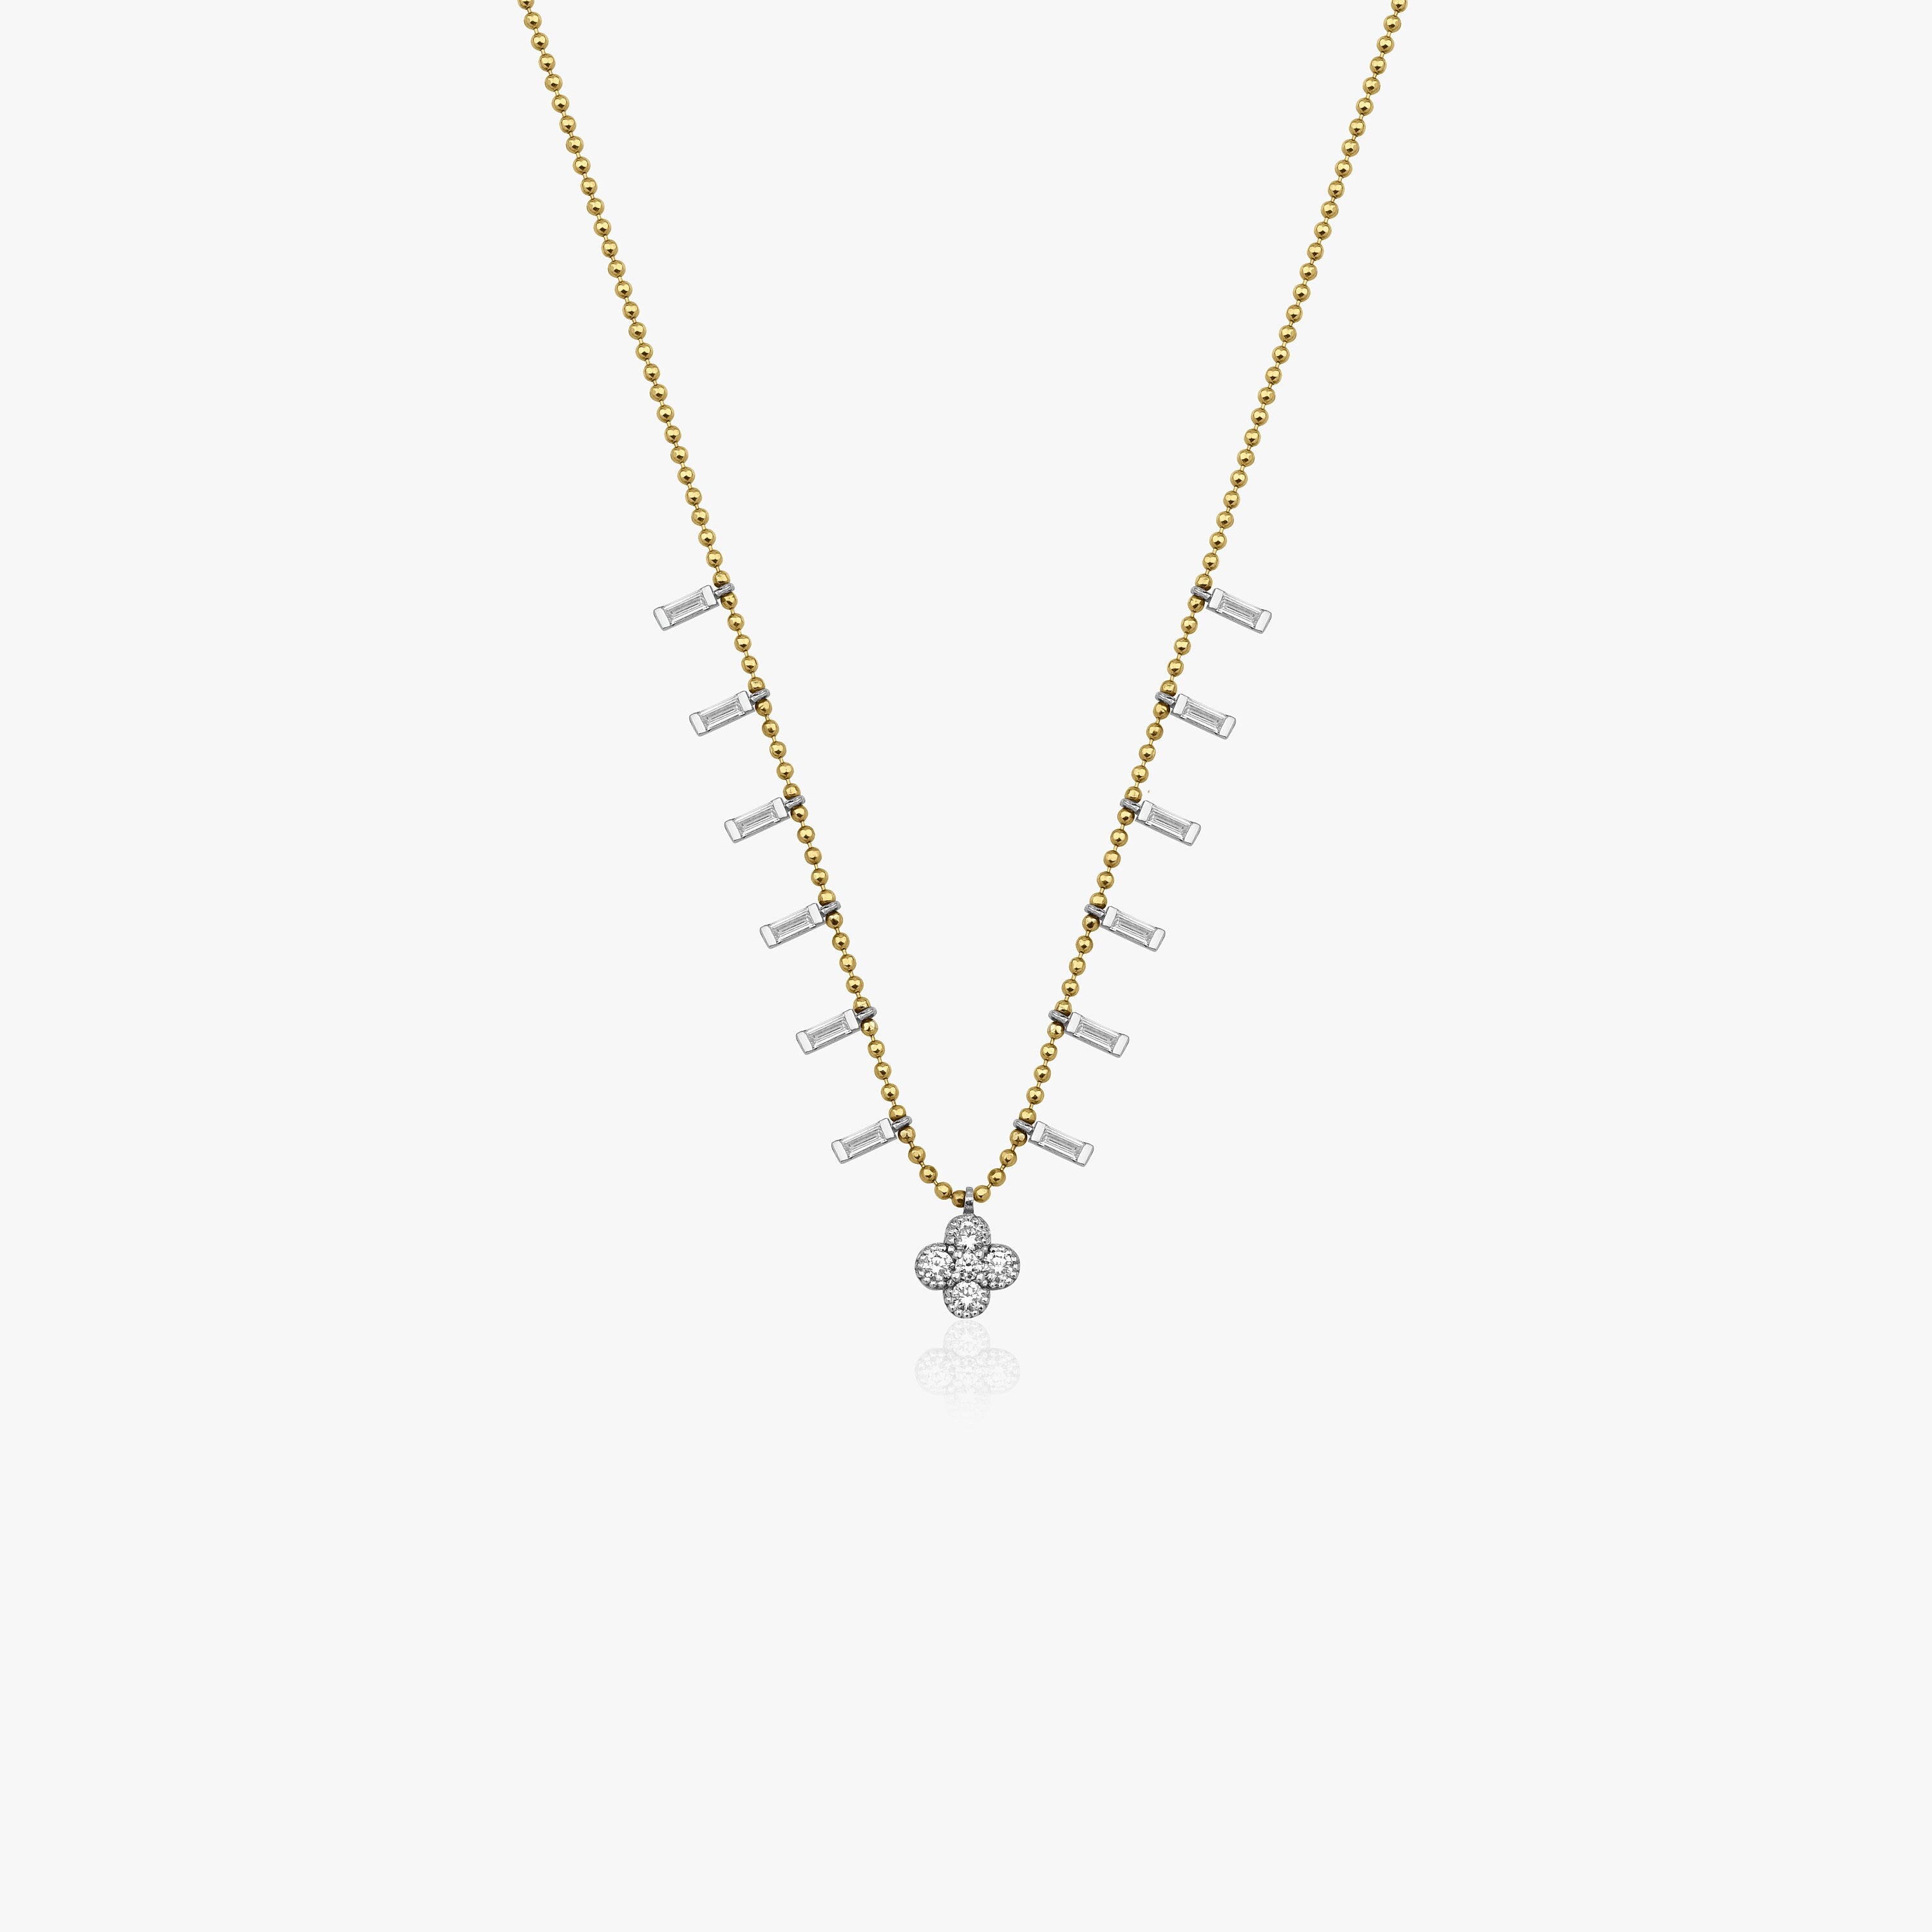 Diamond Clover Necklace With Baguette Cut Diamond Charms in 14K Gold